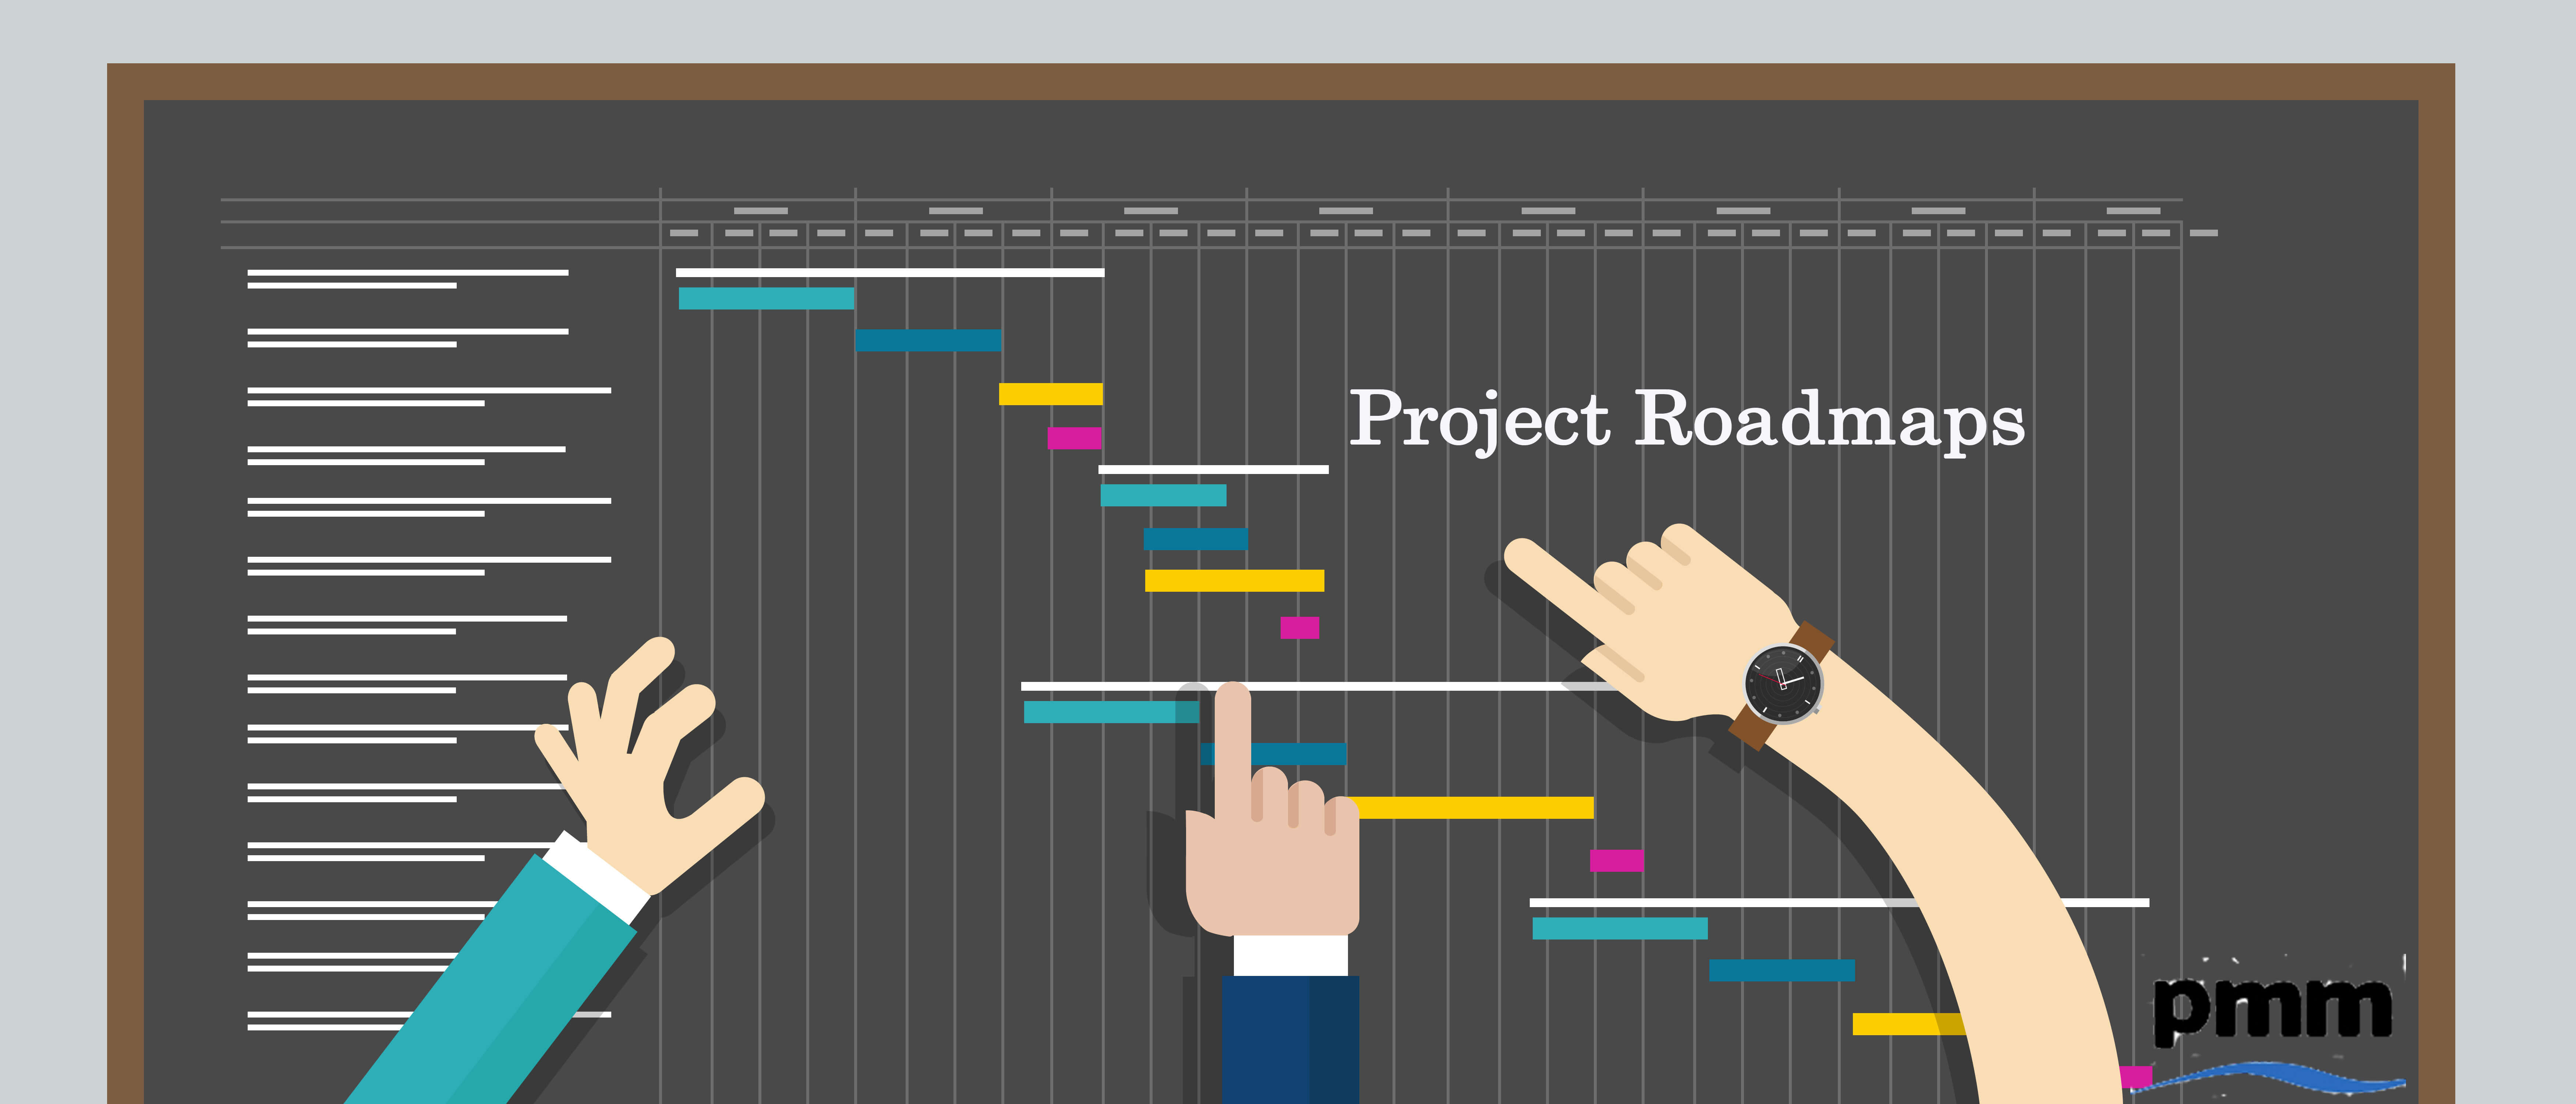 Overview of Project and Programme Roadmaps